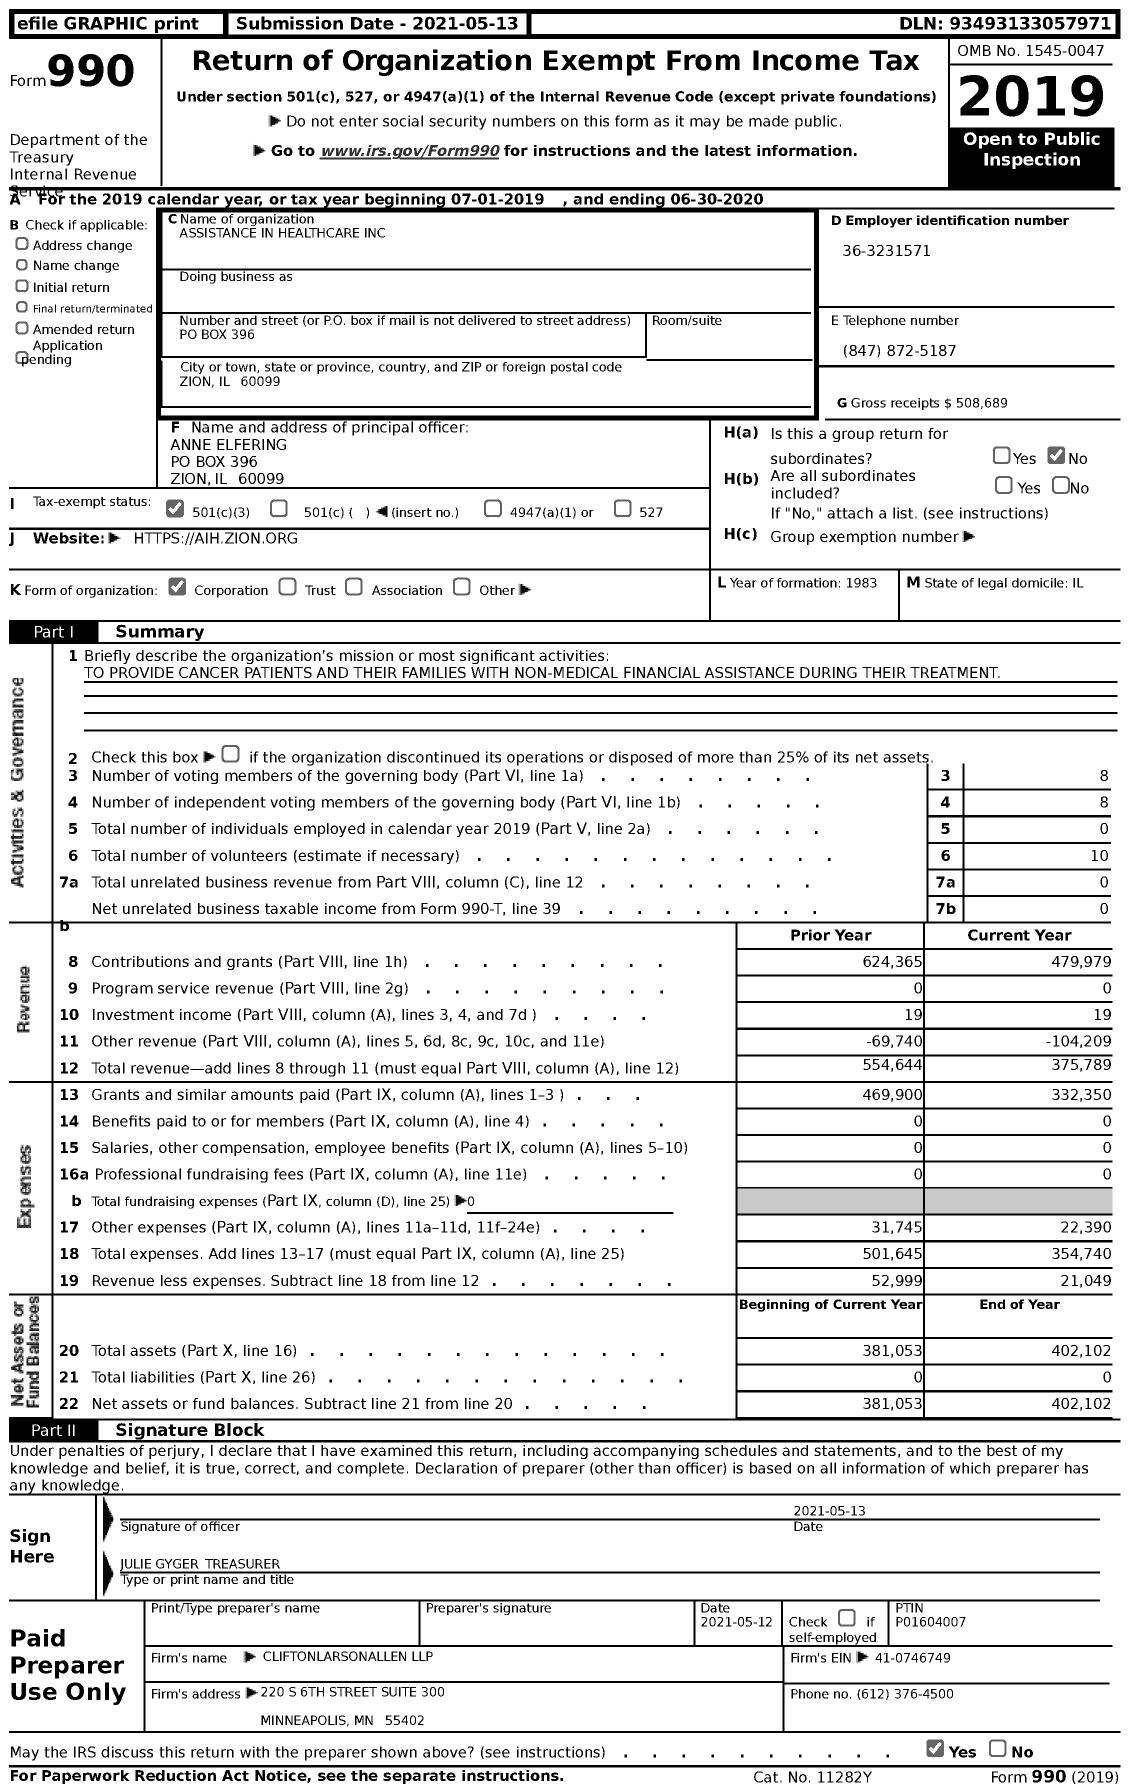 Image of first page of 2019 Form 990 for Assistance in Healthcare